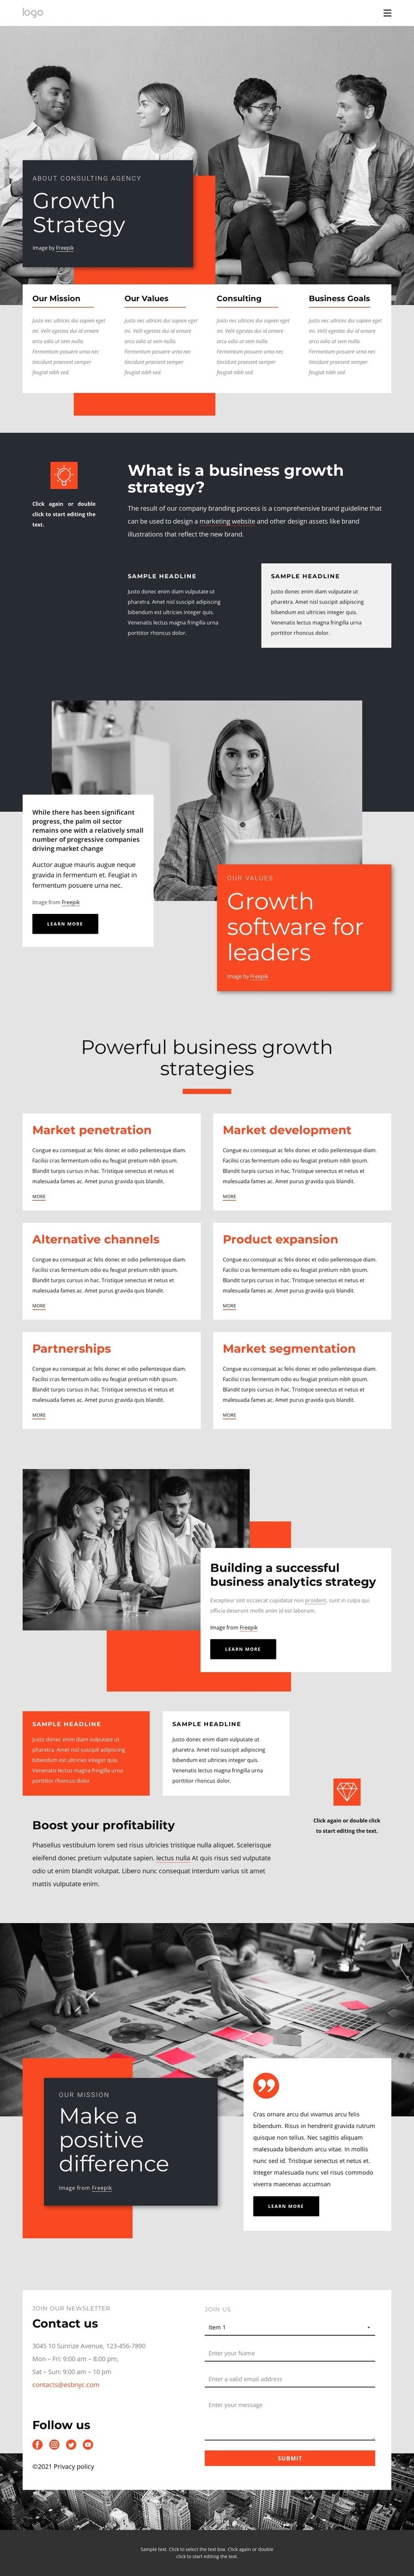 Growth strategy consultants Webflow Template Alternative